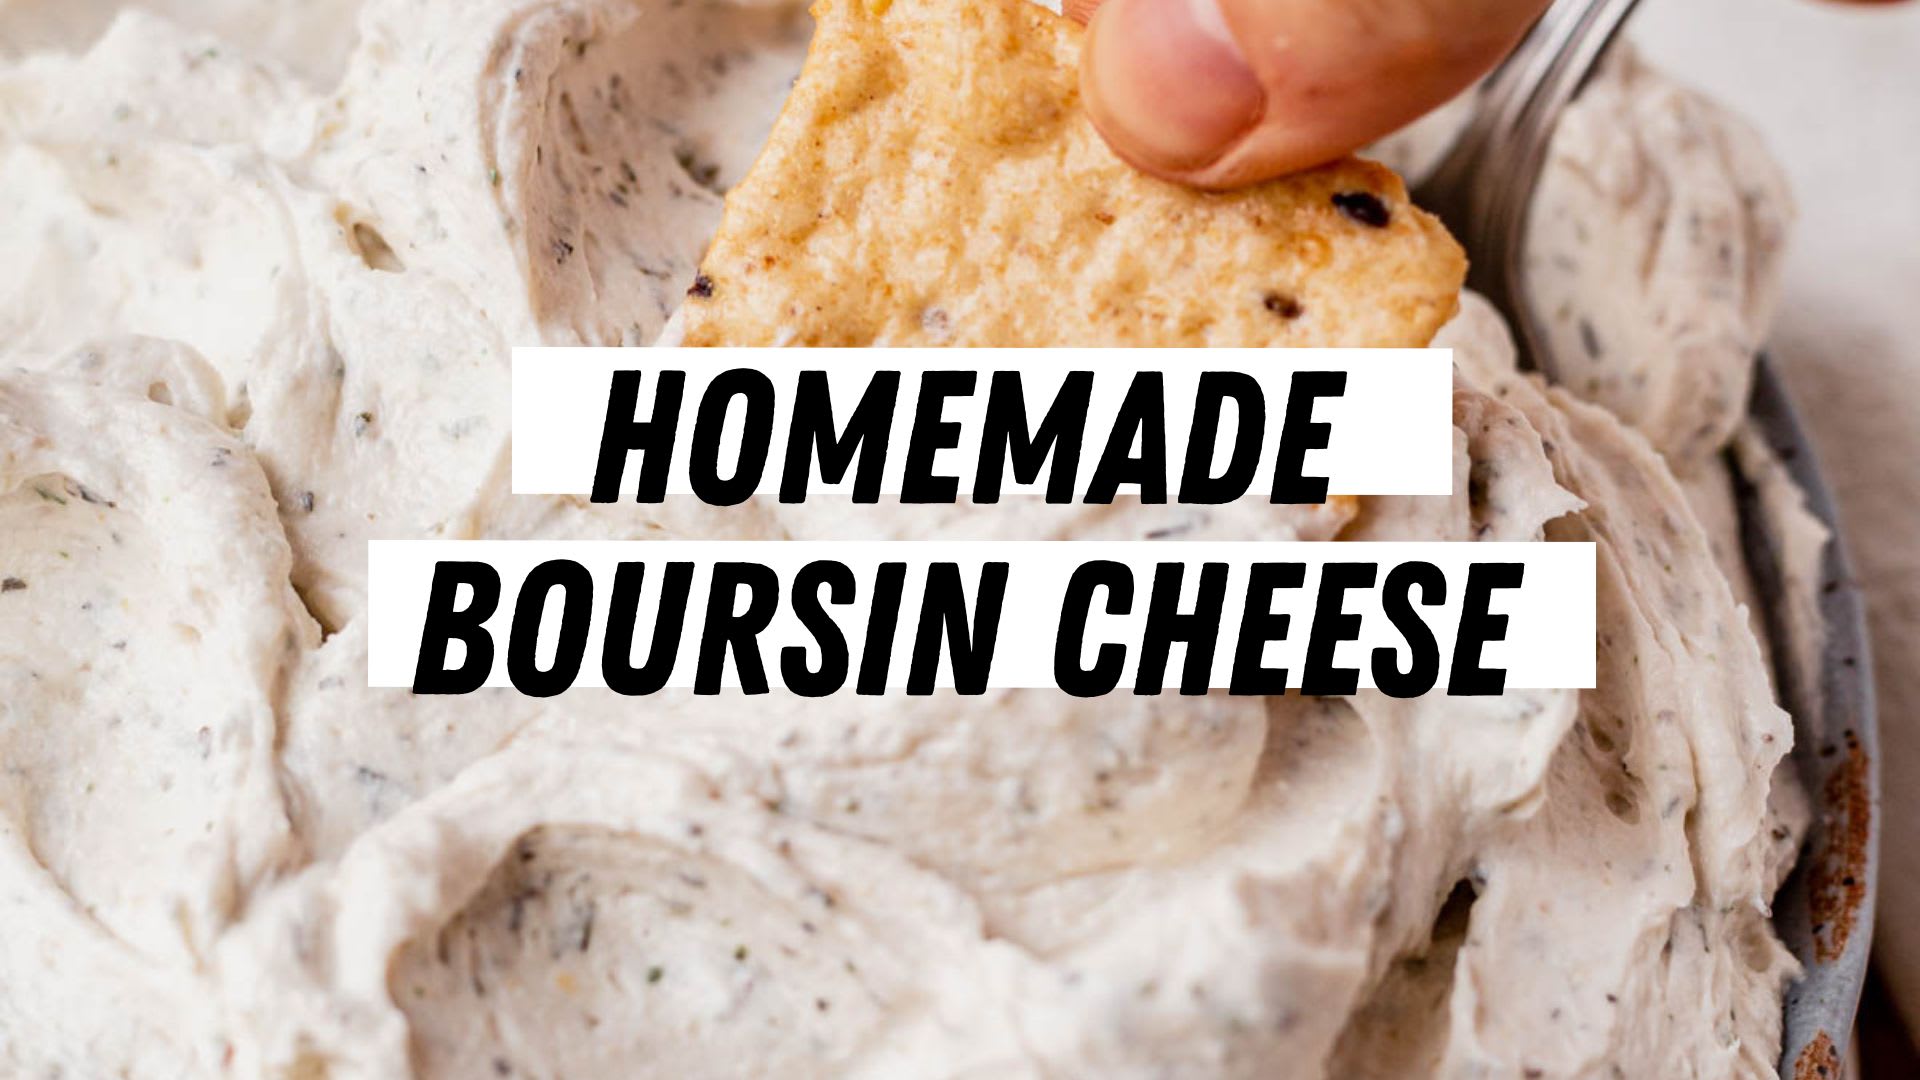 What is Boursin Cheese, Actually?